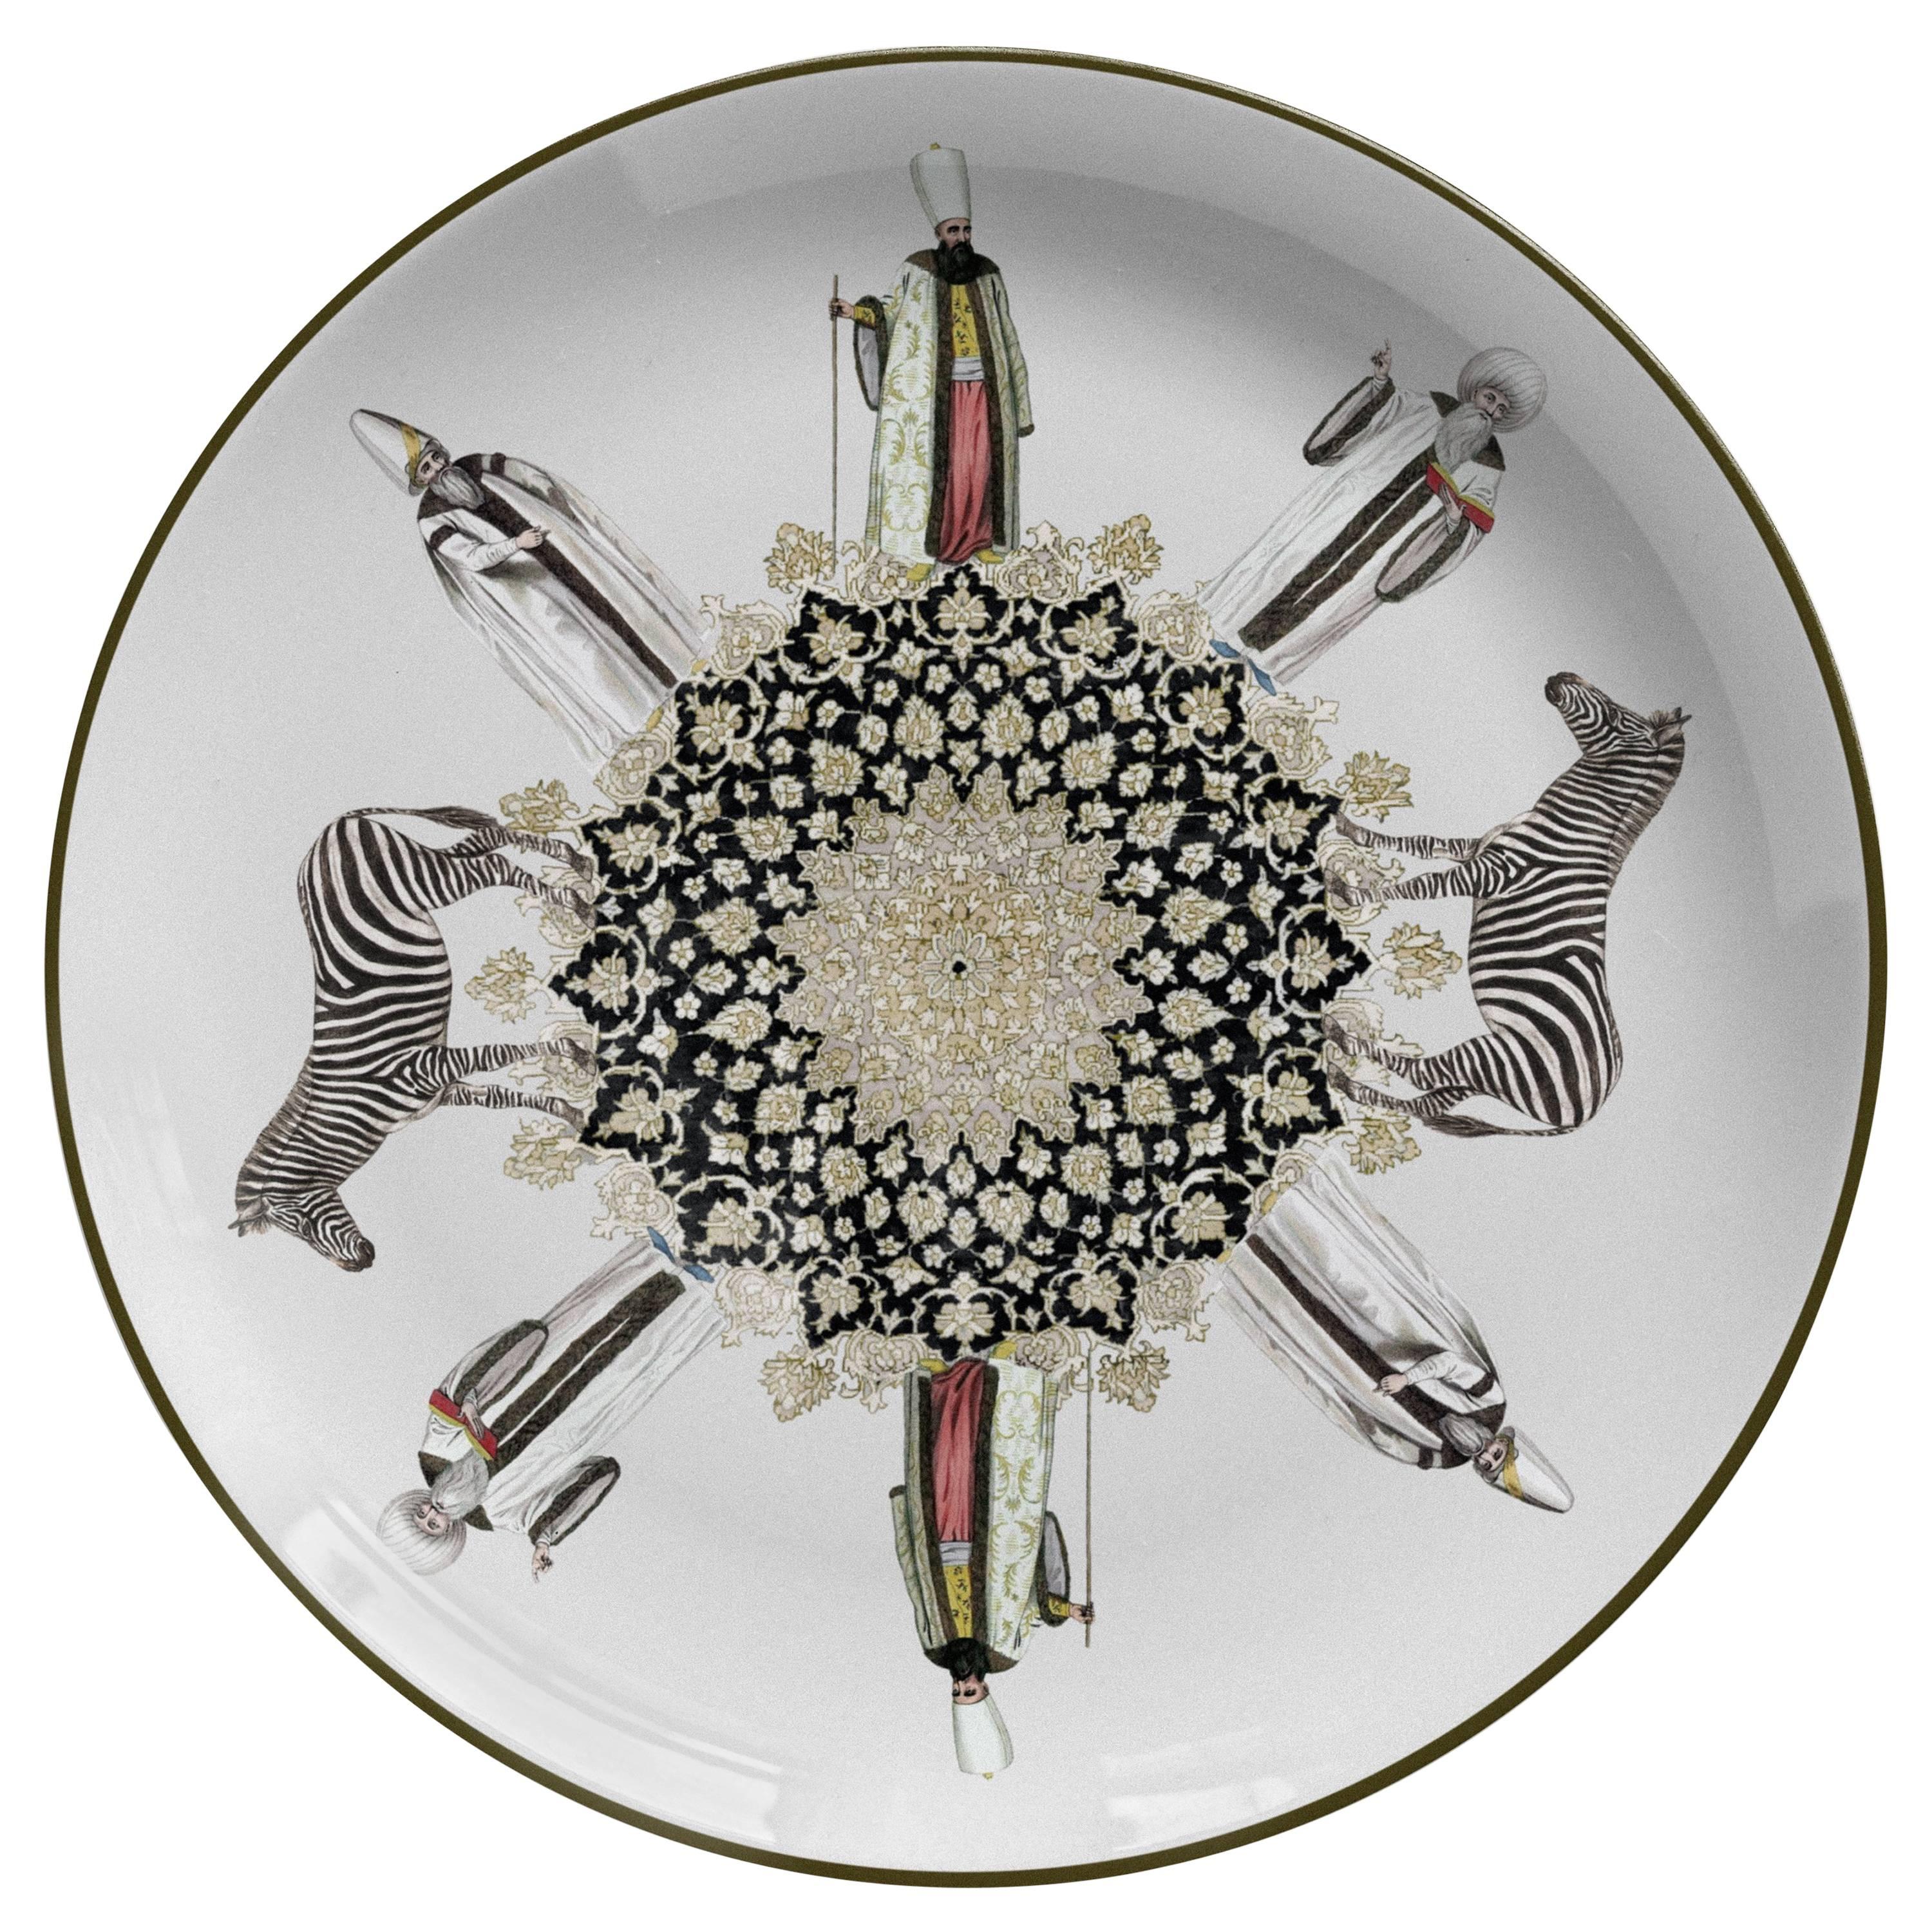 Sacerdoti Porcelain Dinner Plate by Vito Nesta for Les Ottomans, Made in Italy For Sale